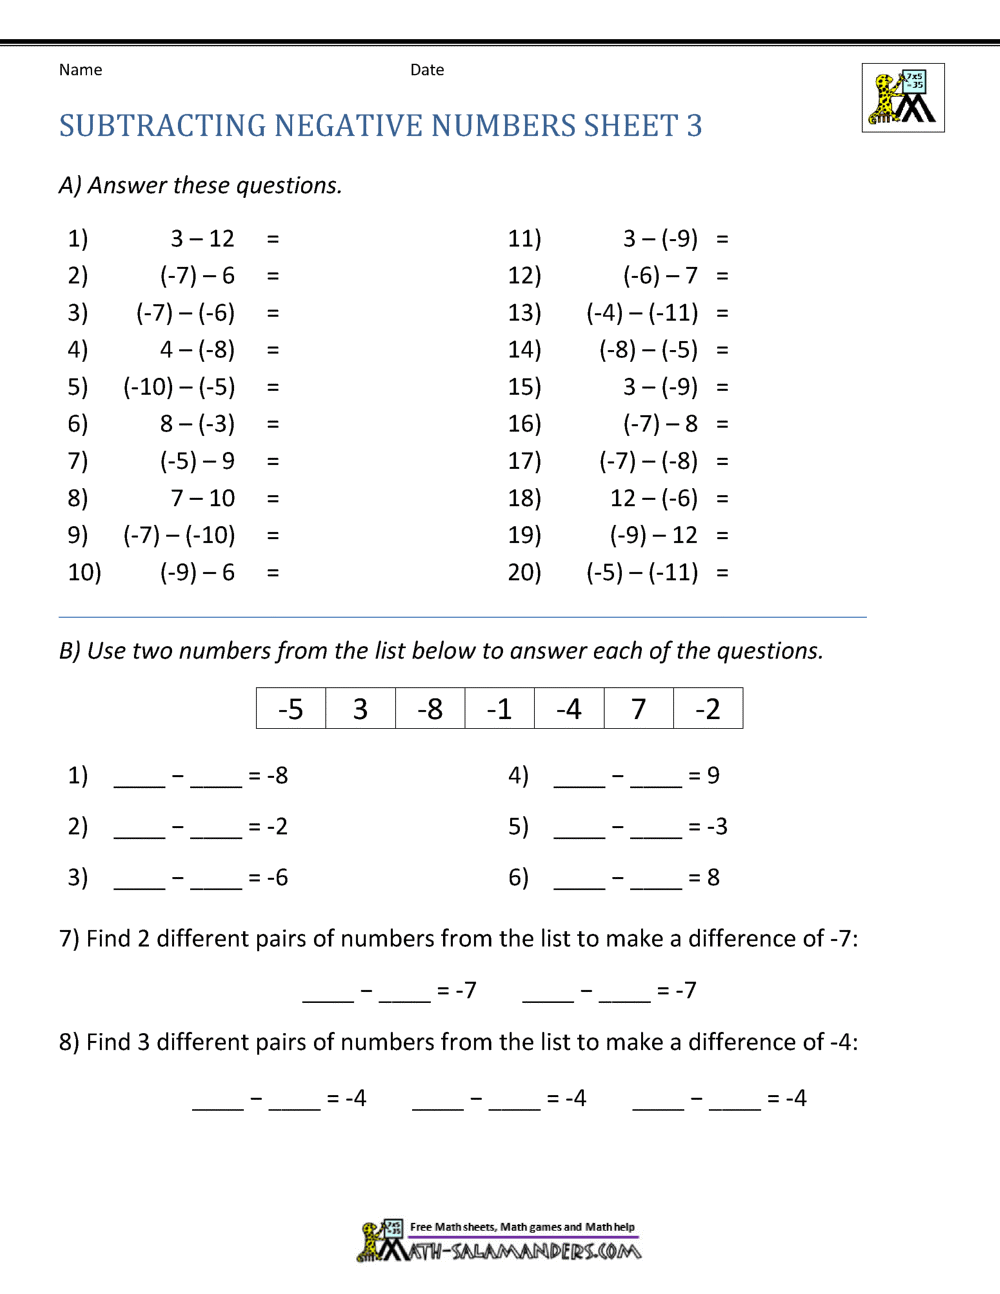 Subtracting Positive and Negative Numbers For Subtracting Integers Worksheet Pdf